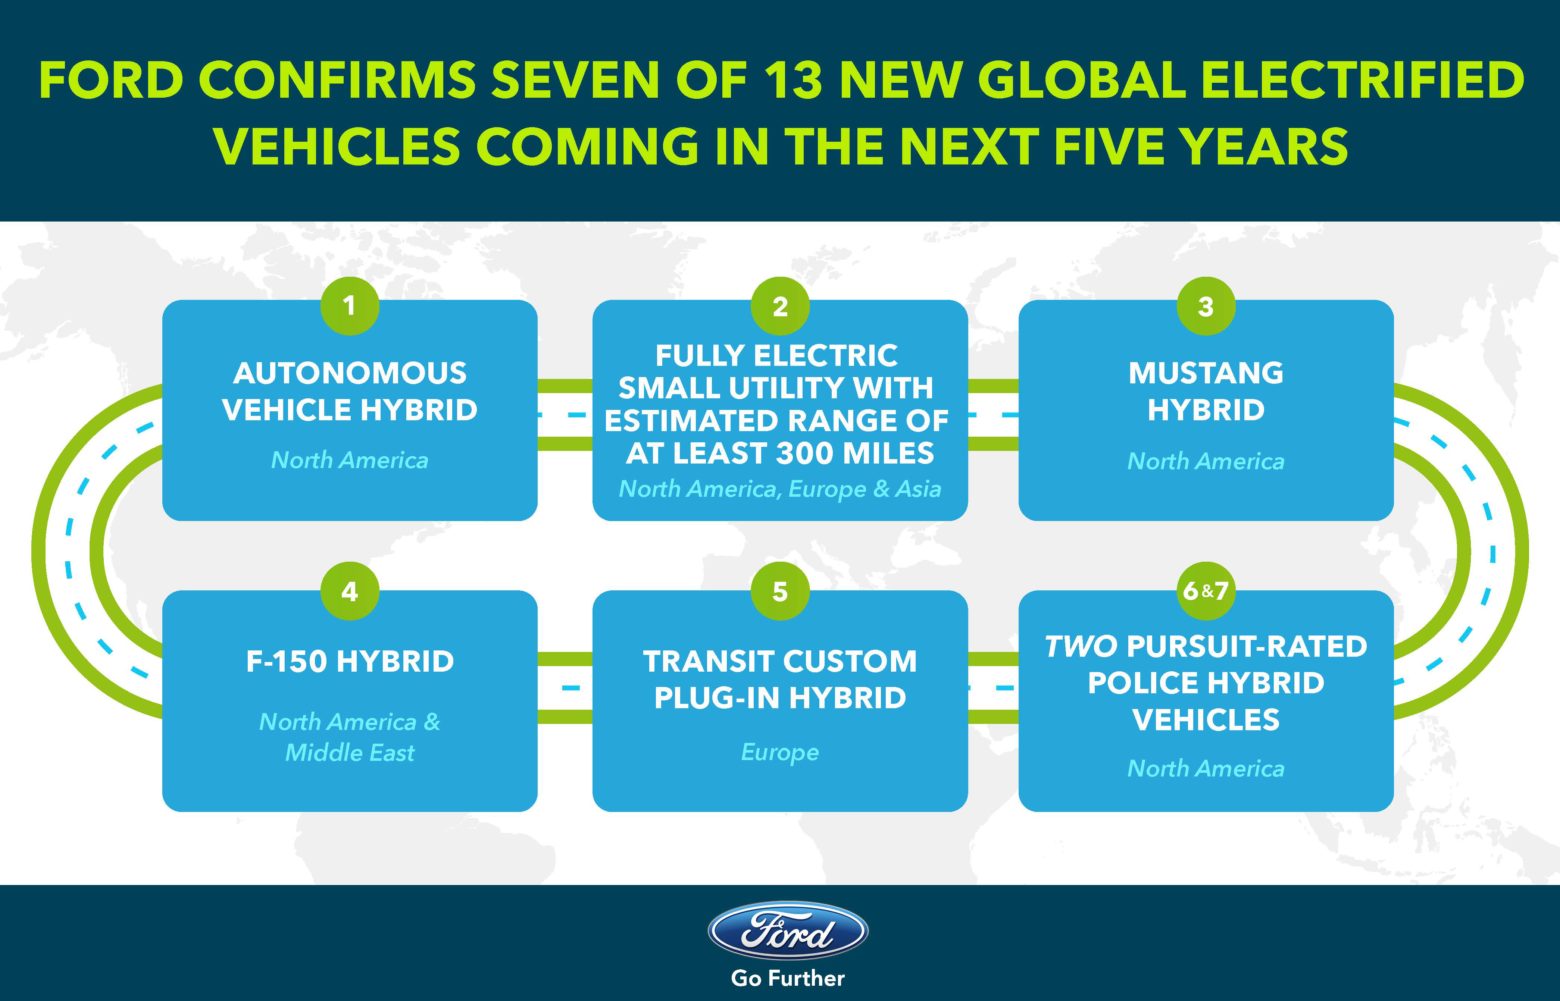 Ford Confirms Seven of 13 Global Electrified Vehicles